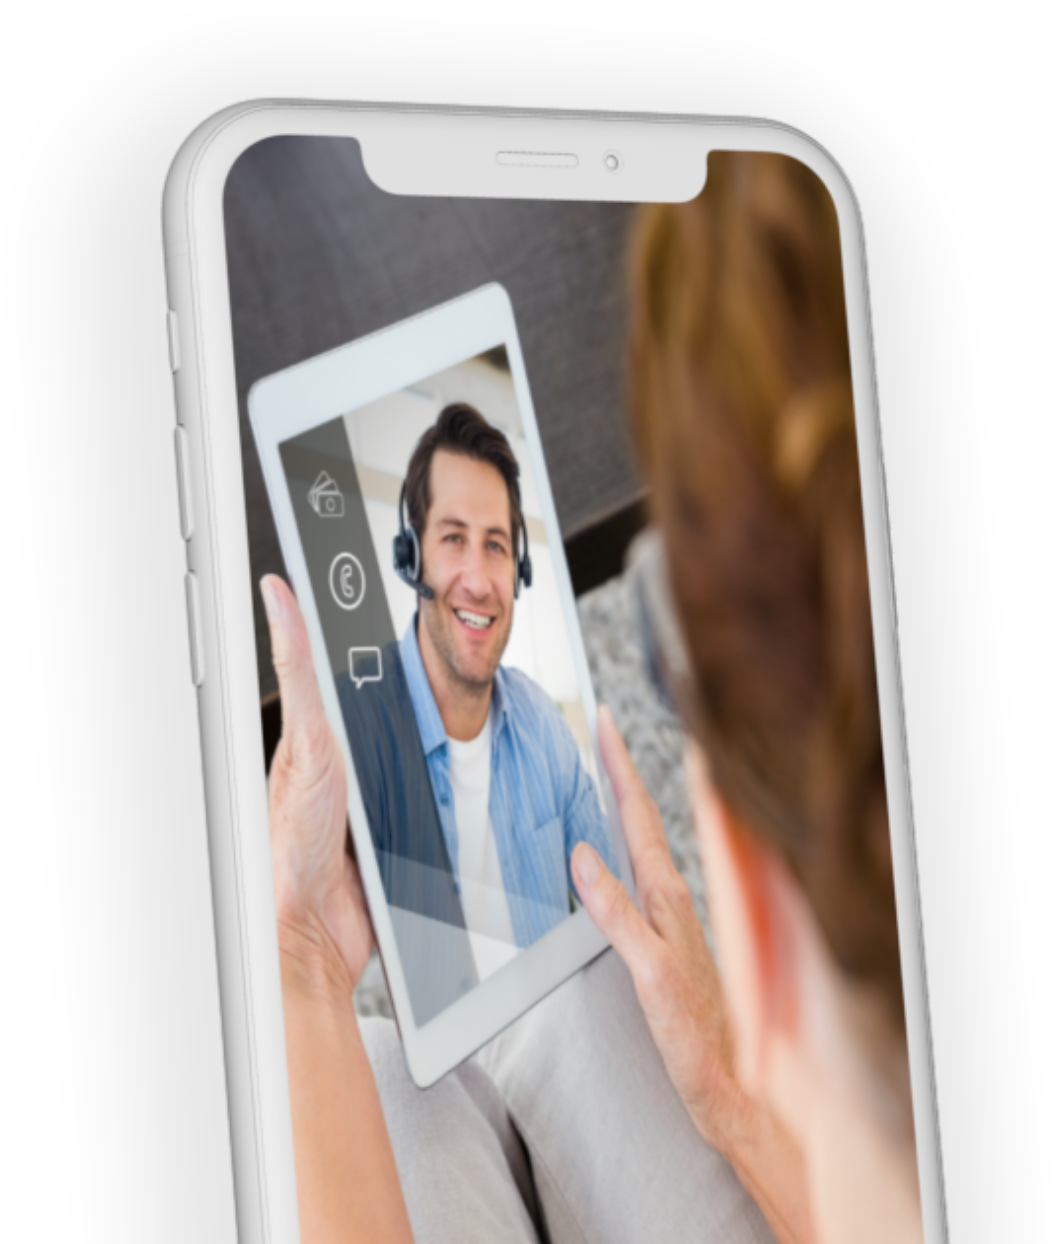 an image of a cell phone where the screen is portraying a person interacting with a person on a video conference call